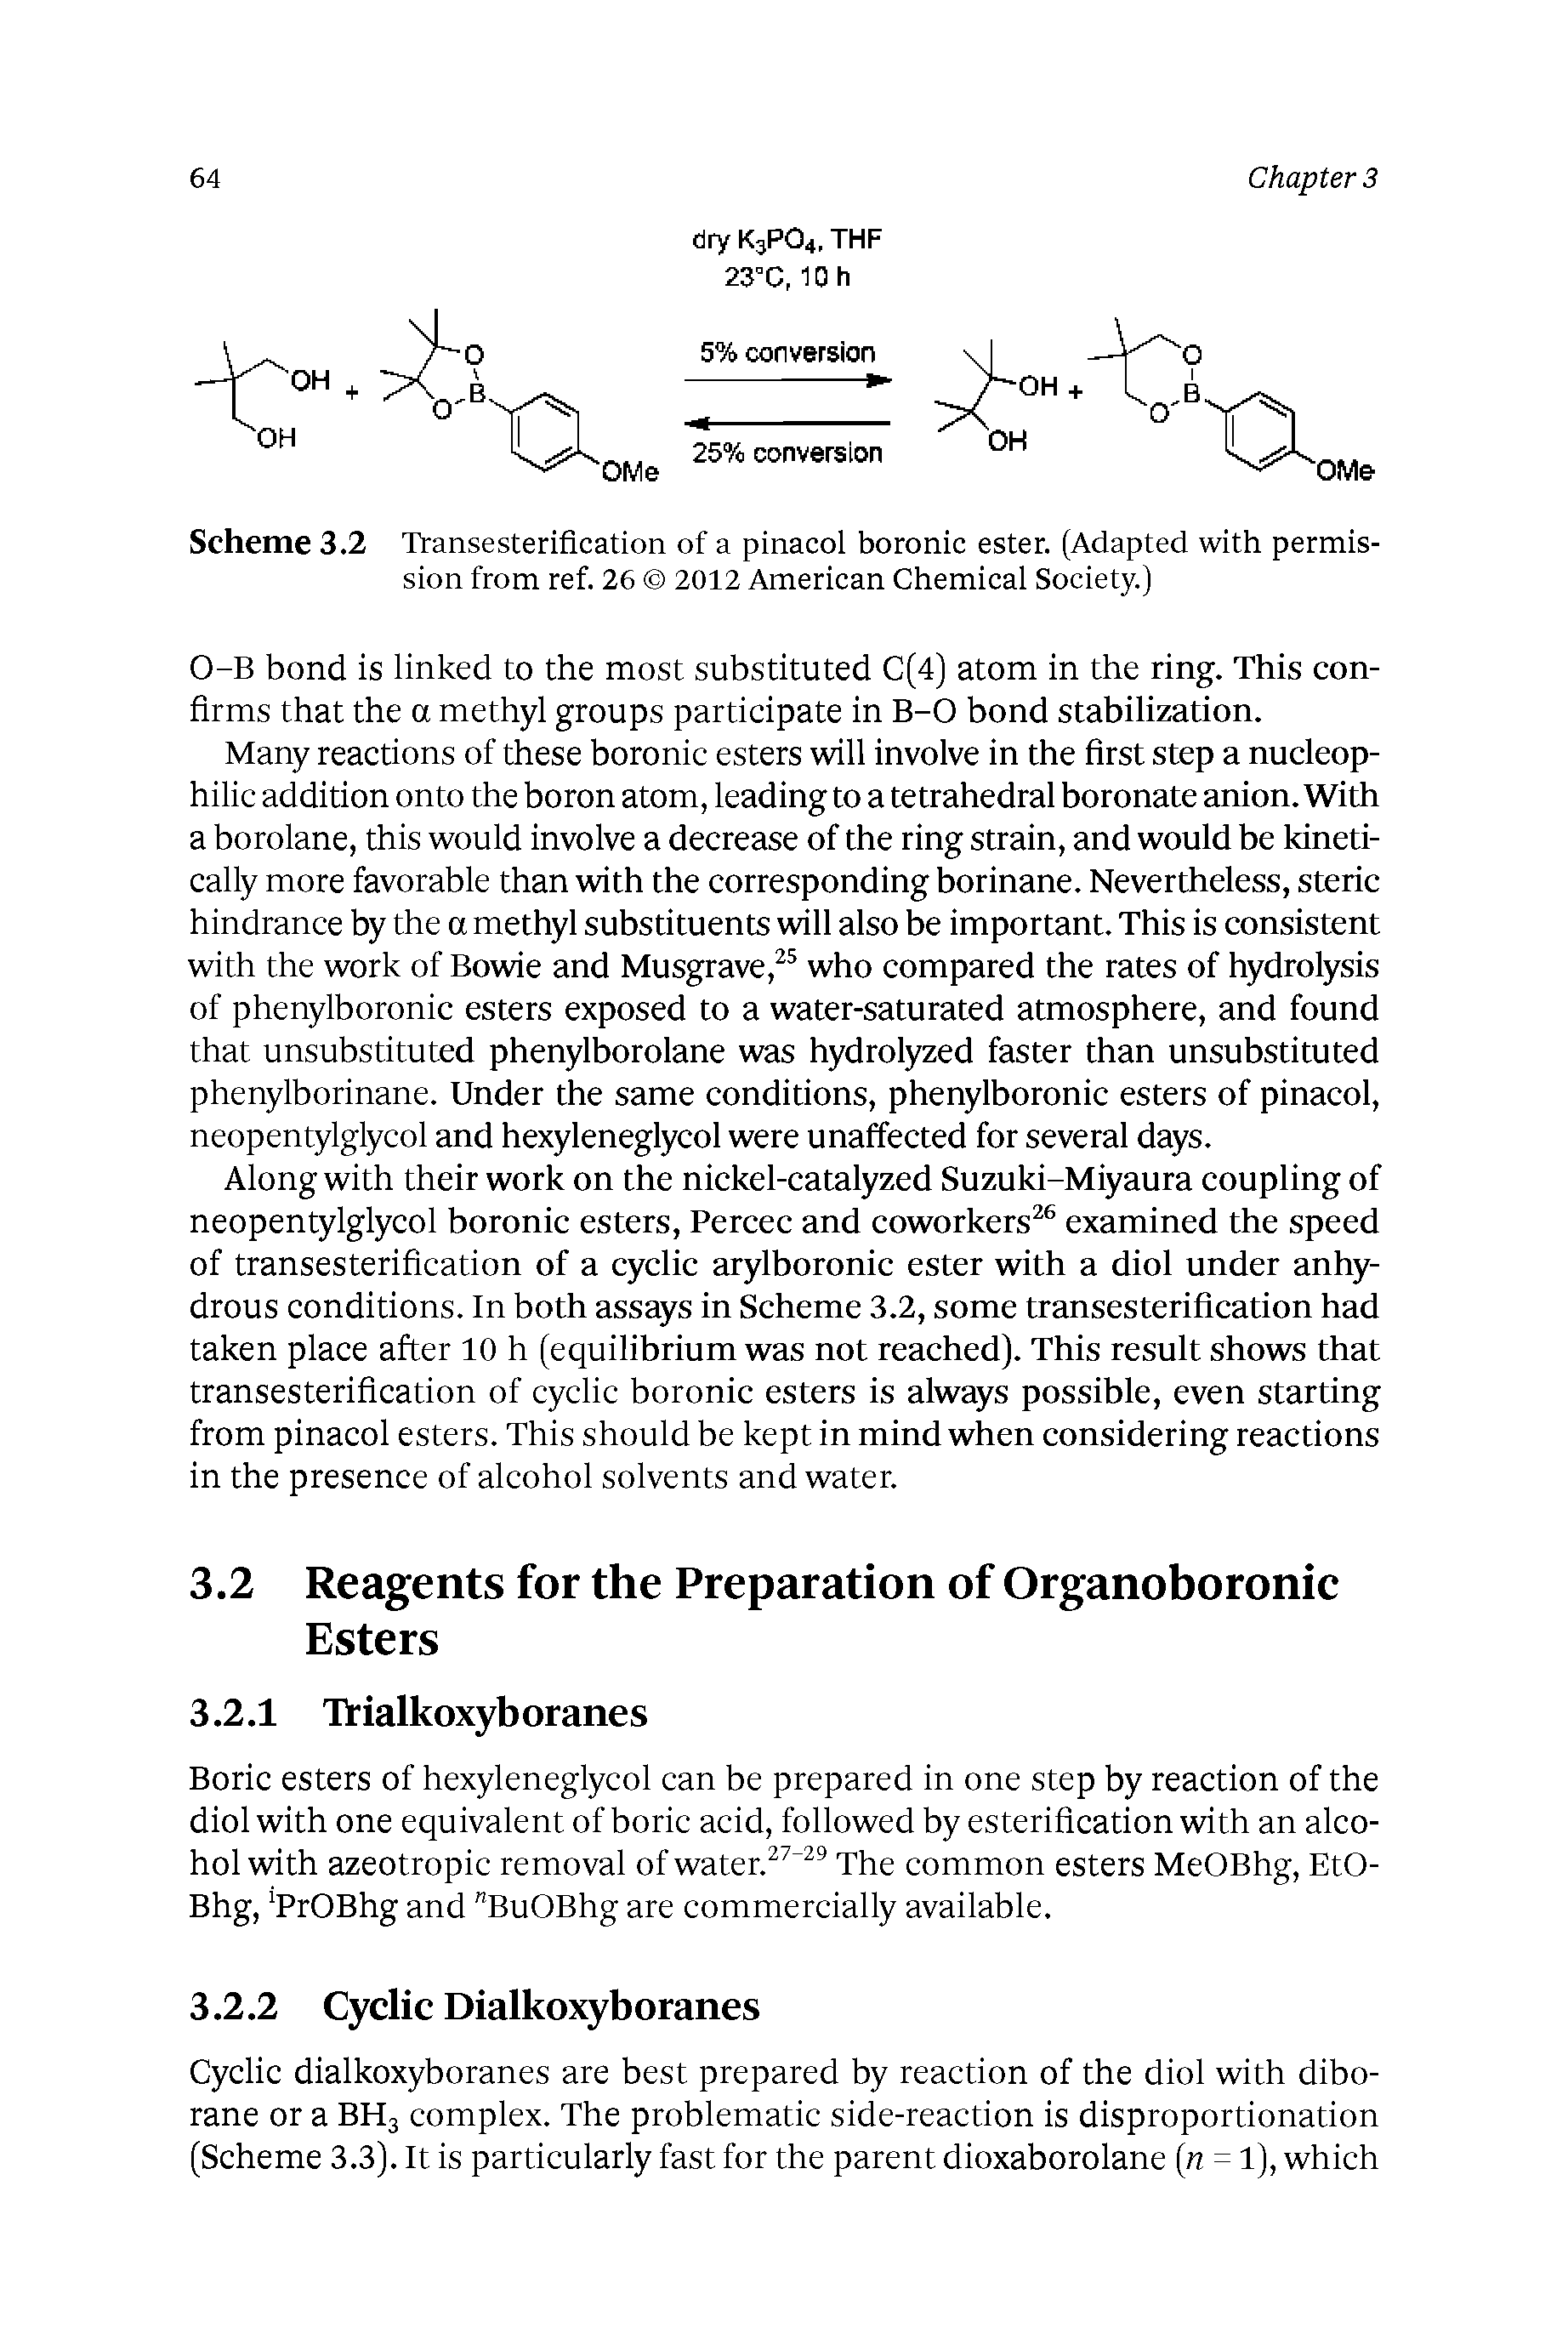 Scheme 3.2 Transesterification of a pinacol boronic ester. (Adapted with permission from ref. 26 2012 American Chemical Society.)...